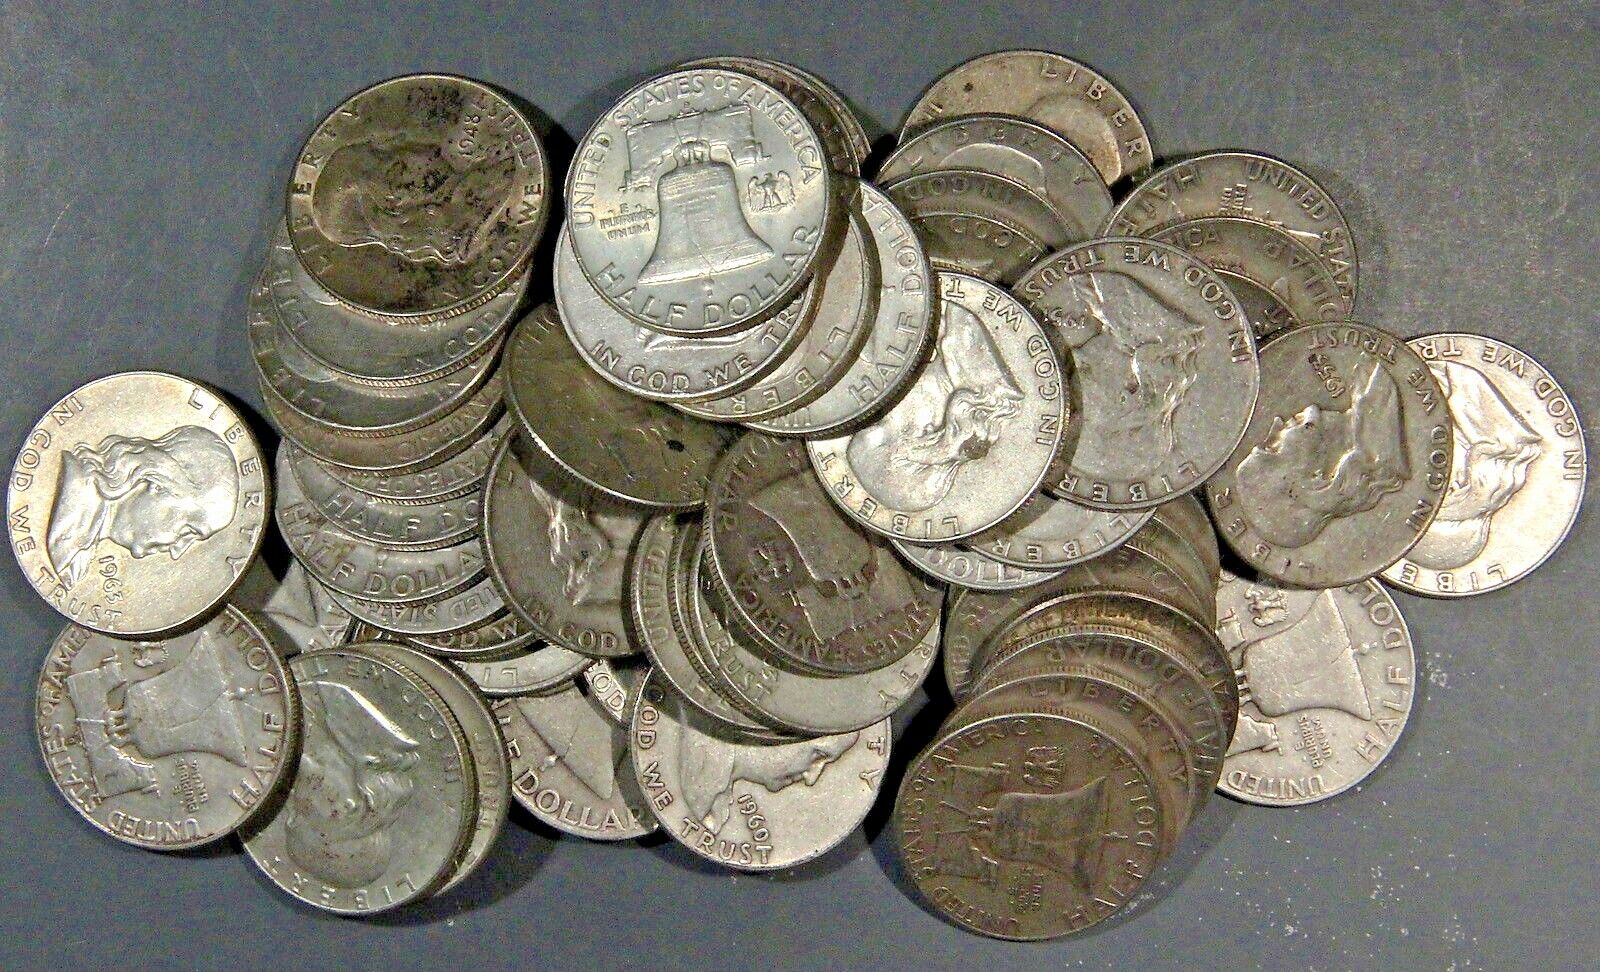 $3 FACE VALUE of FRANKLIN HALF DOLLARS 90% SILVER (LOT OF 6 COINS)